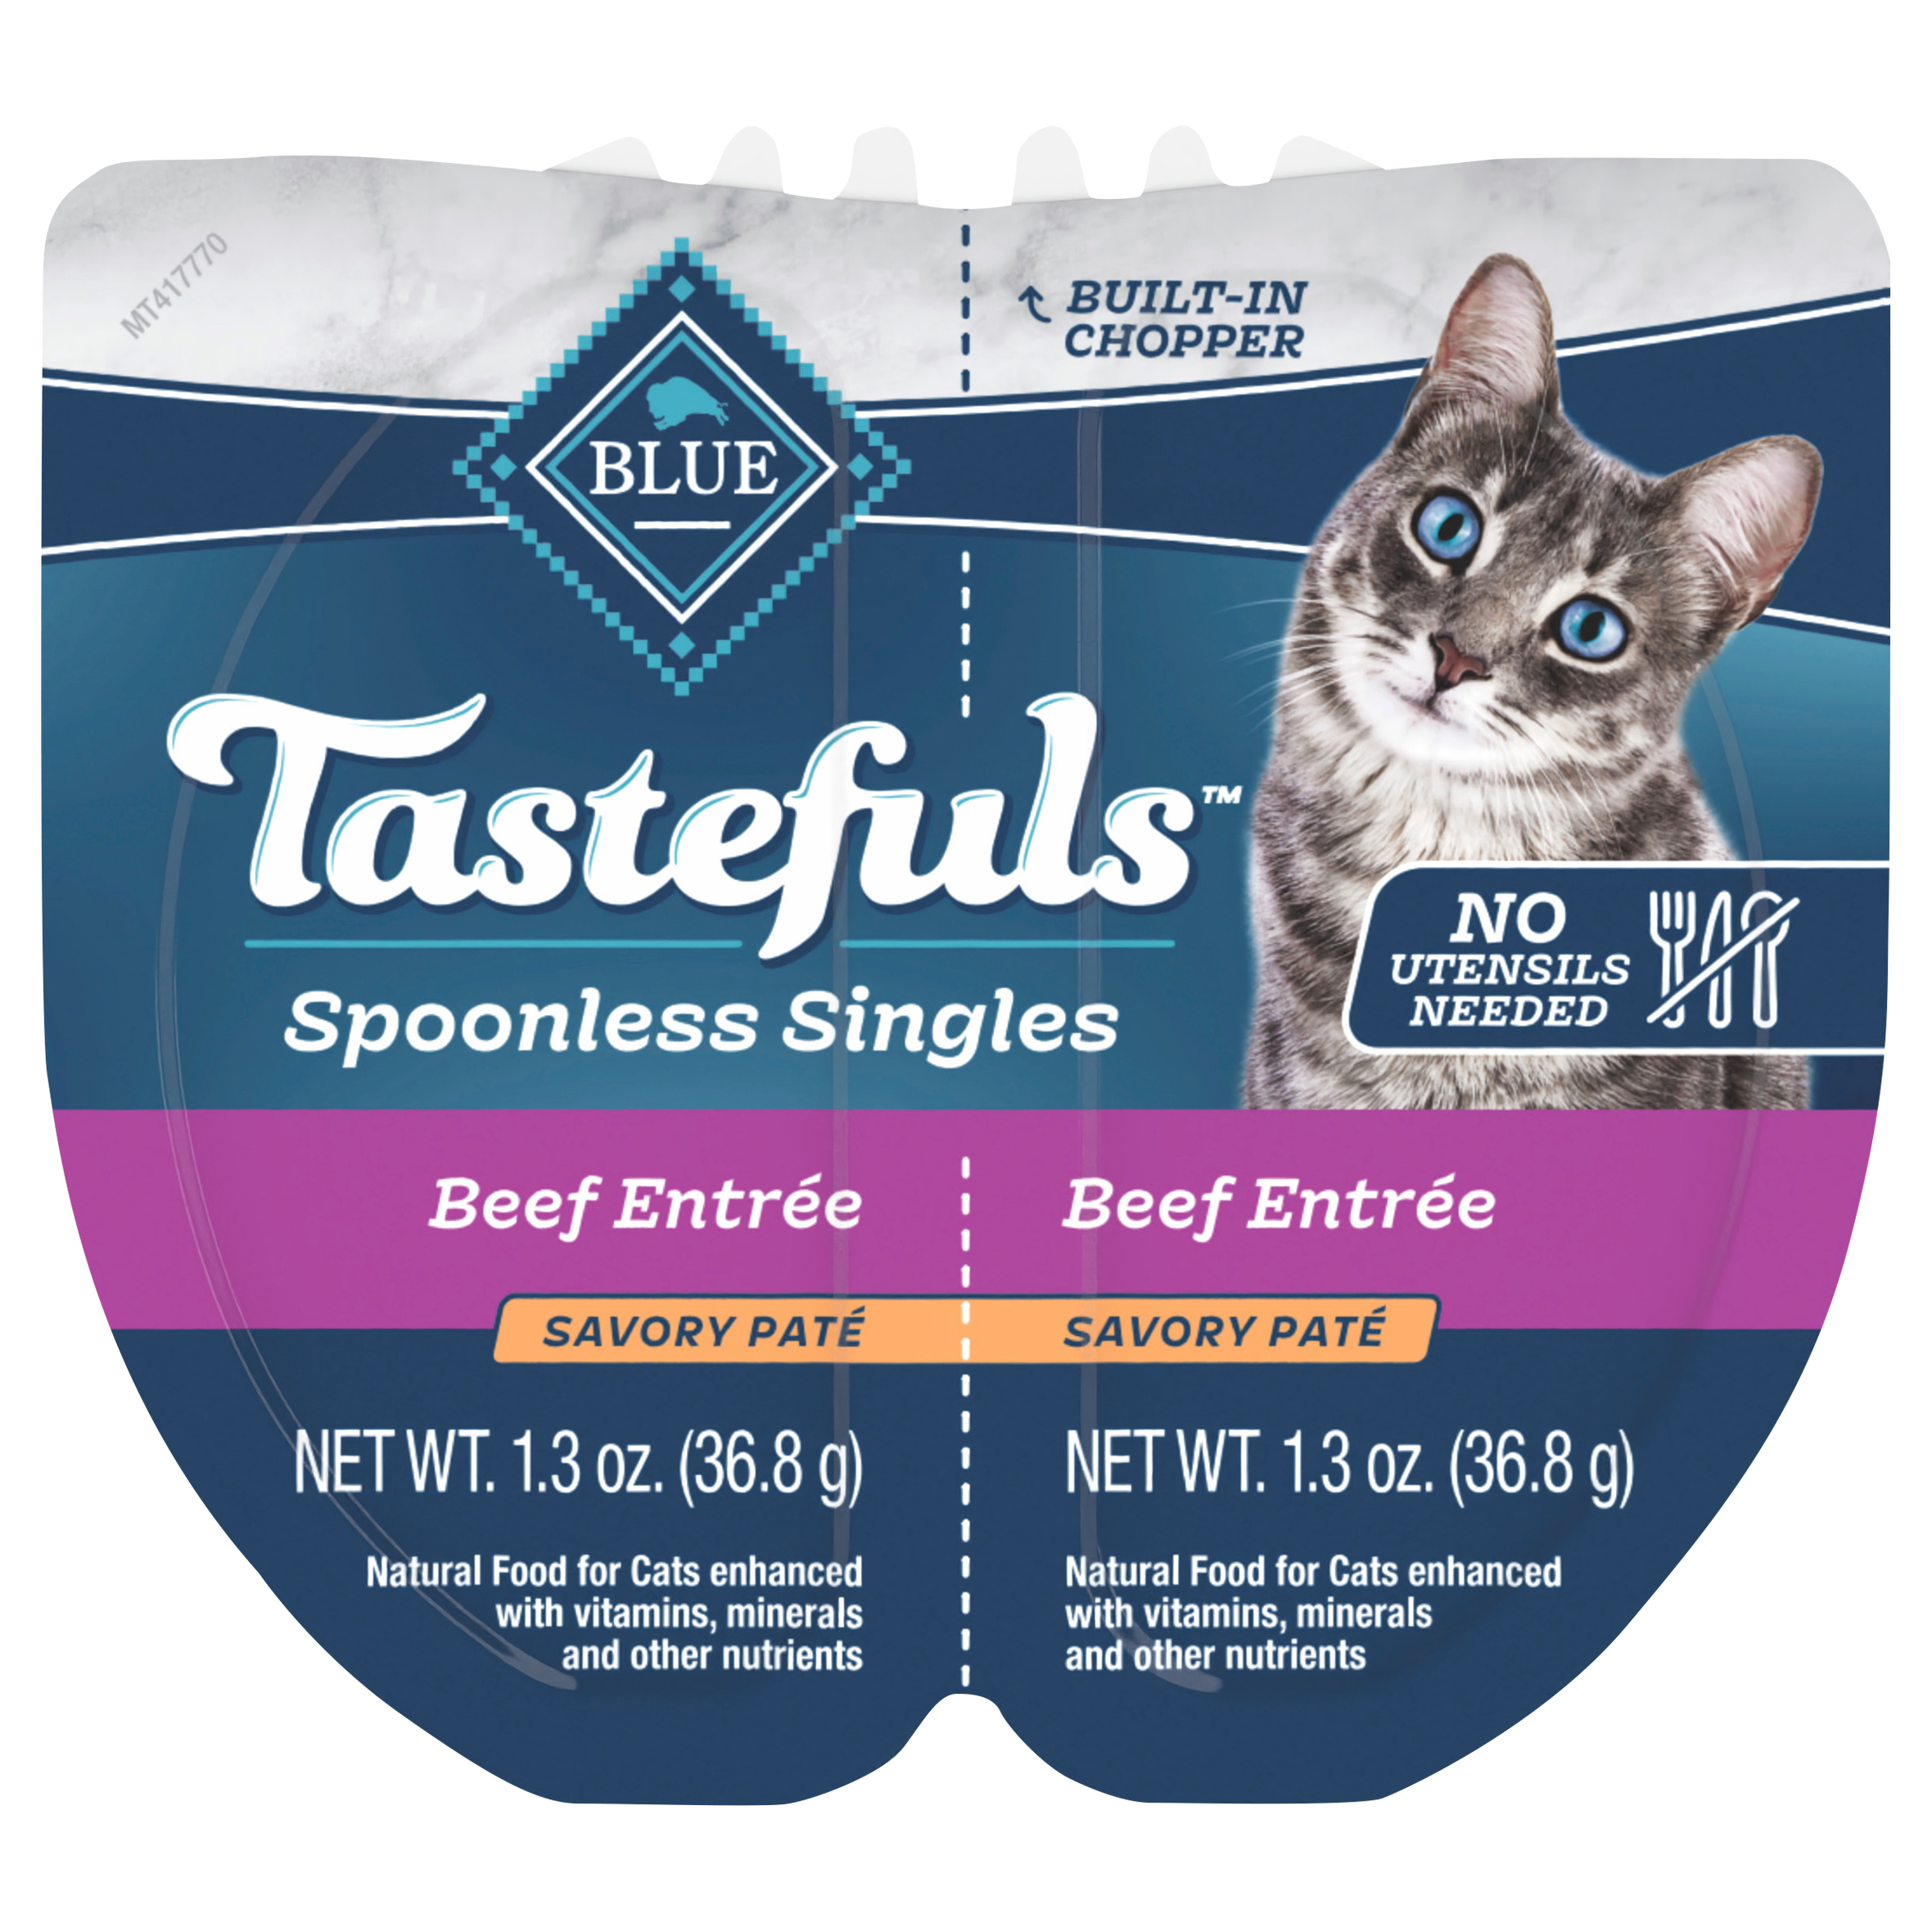 Blue Buffalo Tastefuls Spoonless Singles Adult Pate Wet Cat Food, Beef Entrée, Perfectly Portioned Cups in a 2.6-oz Twin